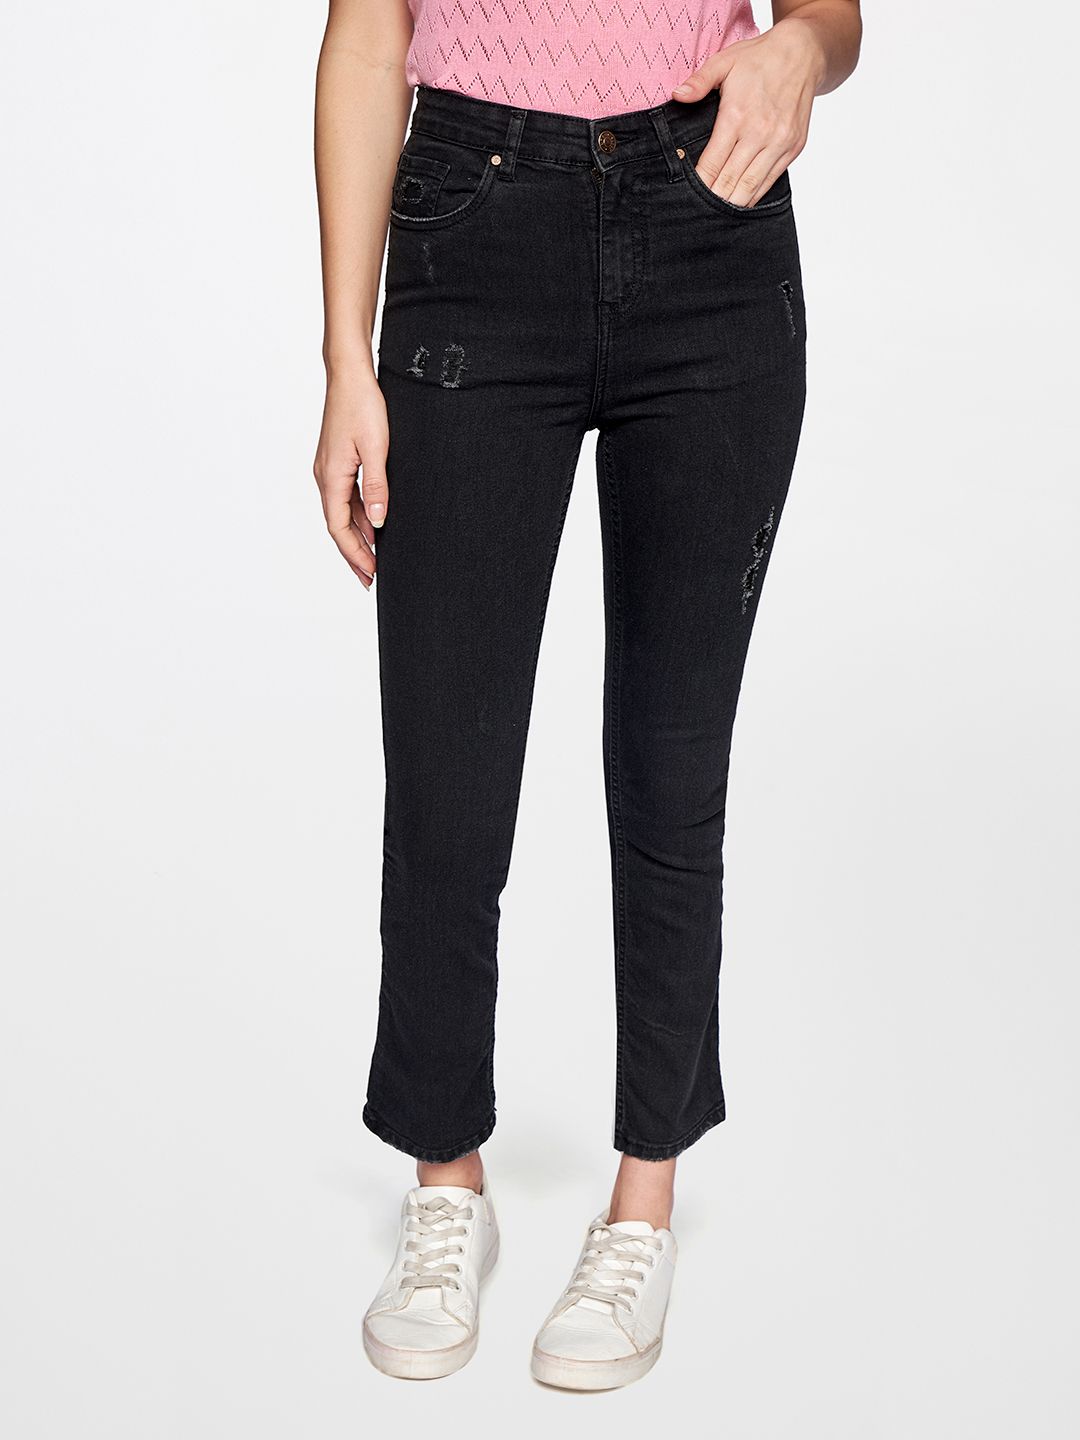 AND Women Charcoal Slim Fit Mildly Distressed Mid Rise Stretchable Jeans Price in India